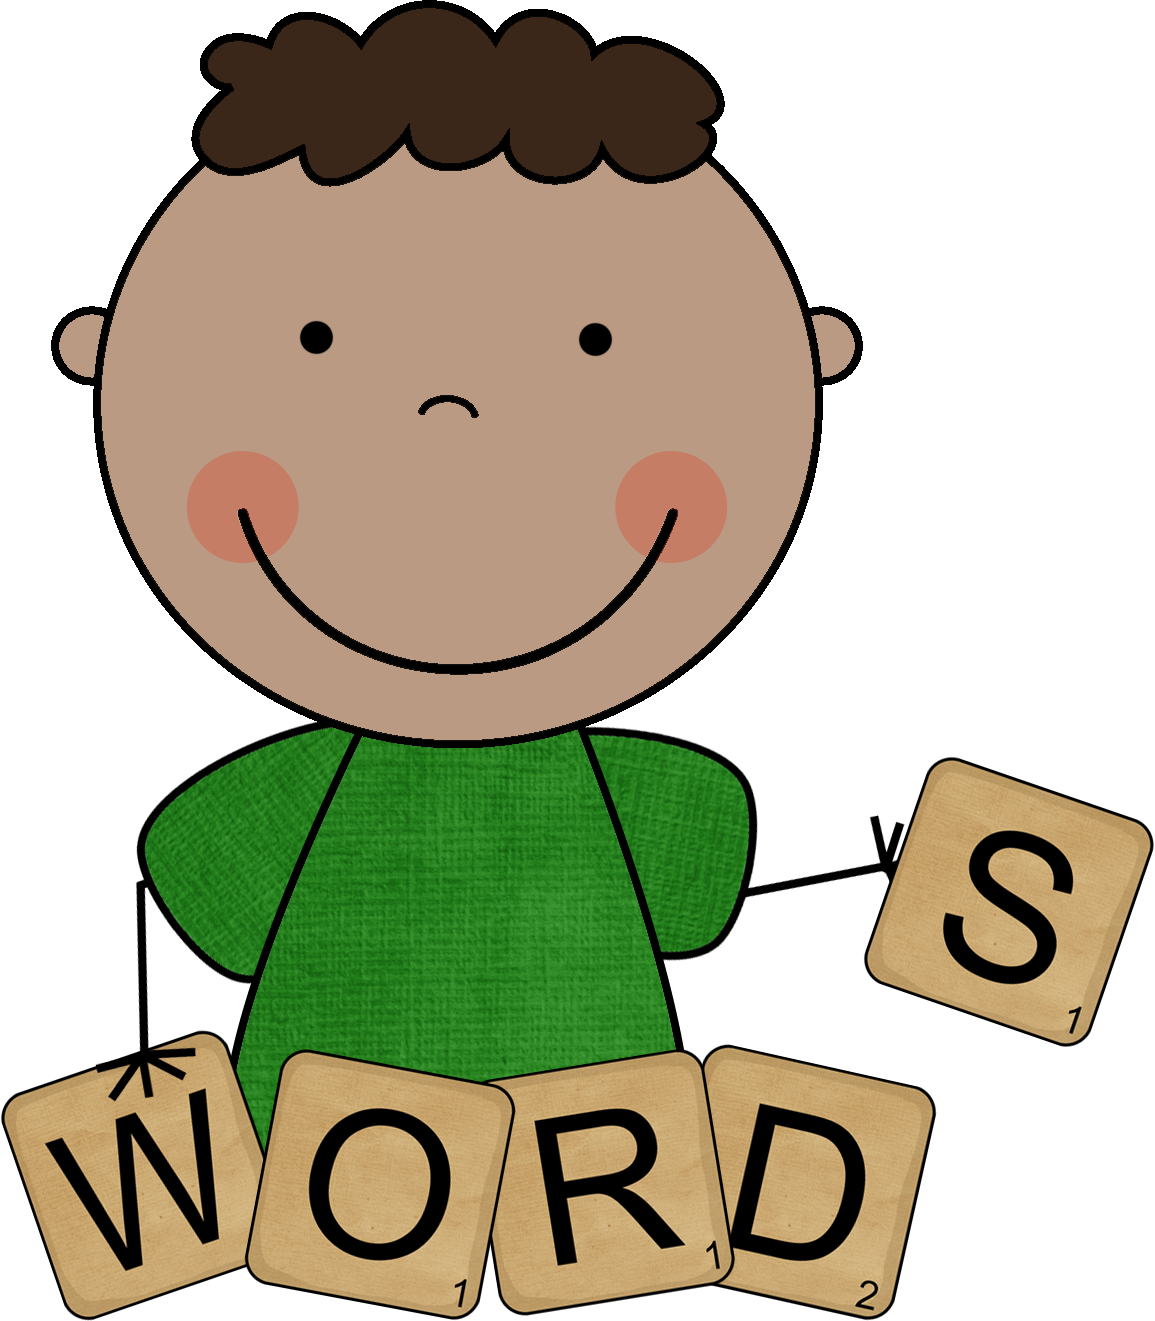 Vocabulary drawing at getdrawings. Crafts clipart word